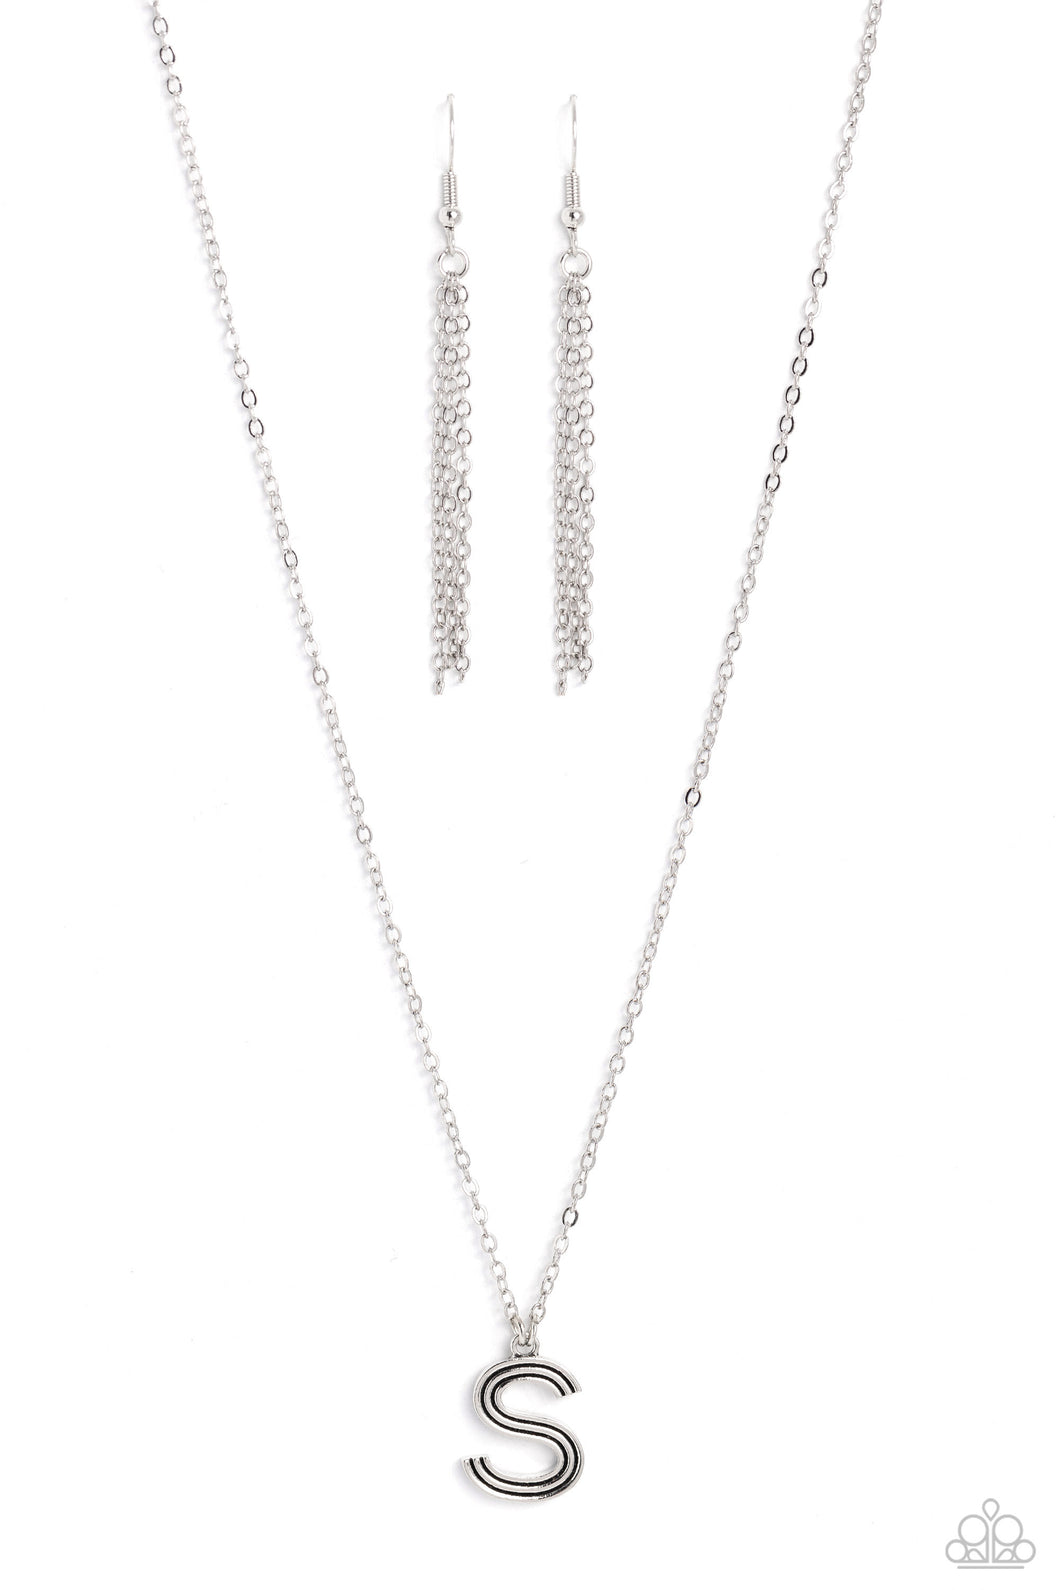 Paparazzi Leave Your Initials - Silver S Necklace